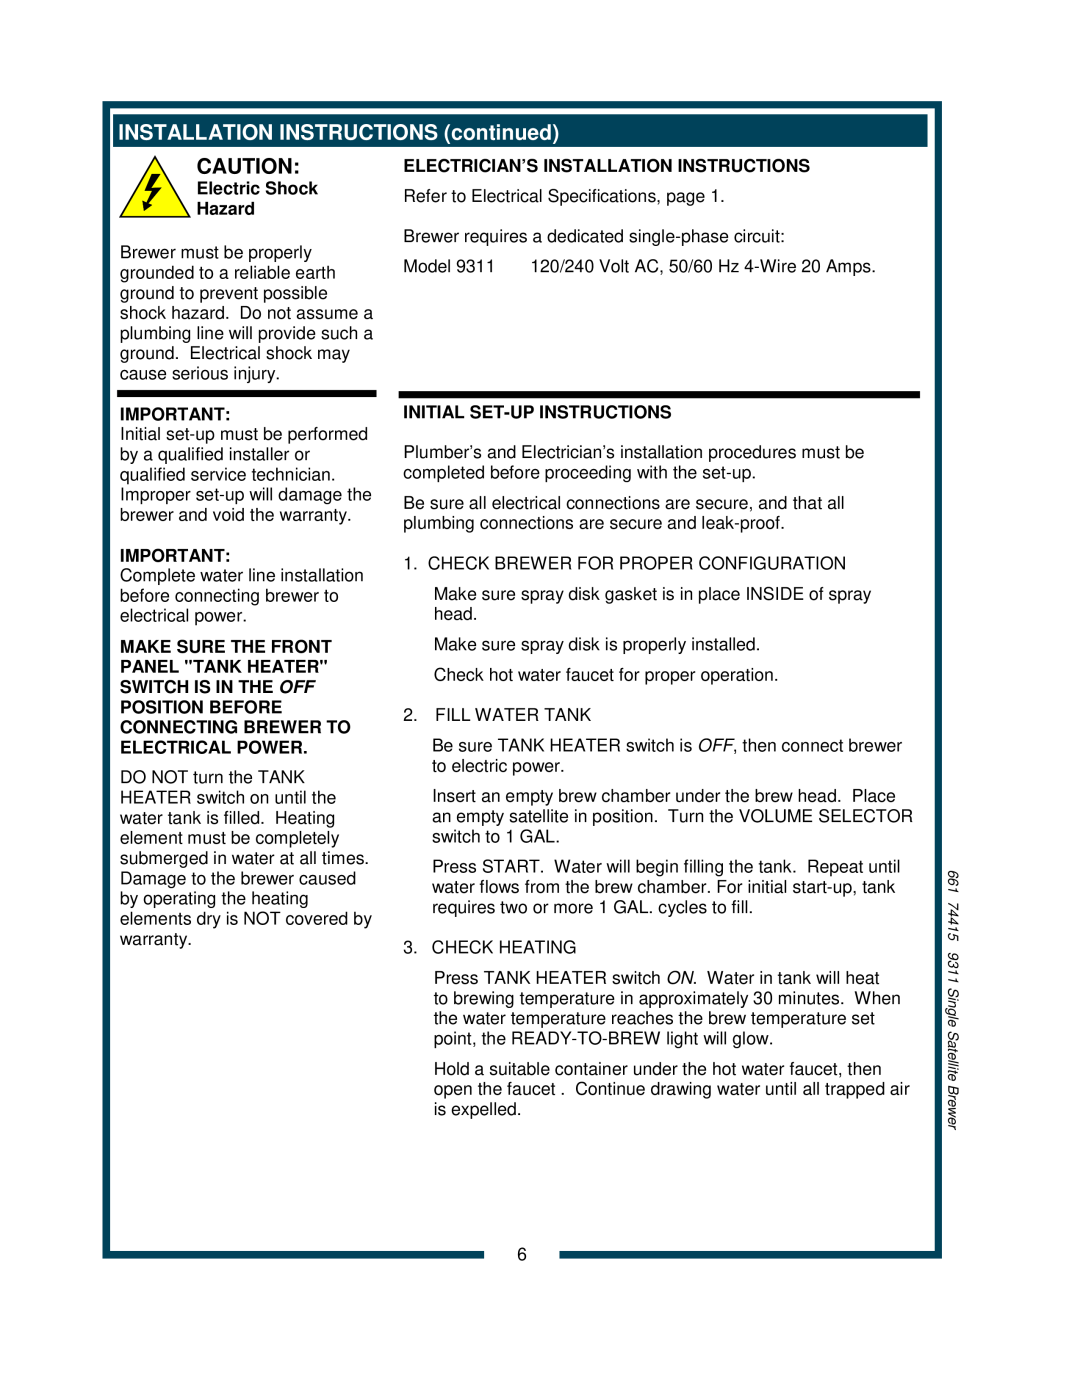 Bloomfield 9311 INSTALLATION INSTRUCTIONS continued, Electric Shock Hazard, Electrician’S Installation Instructions 